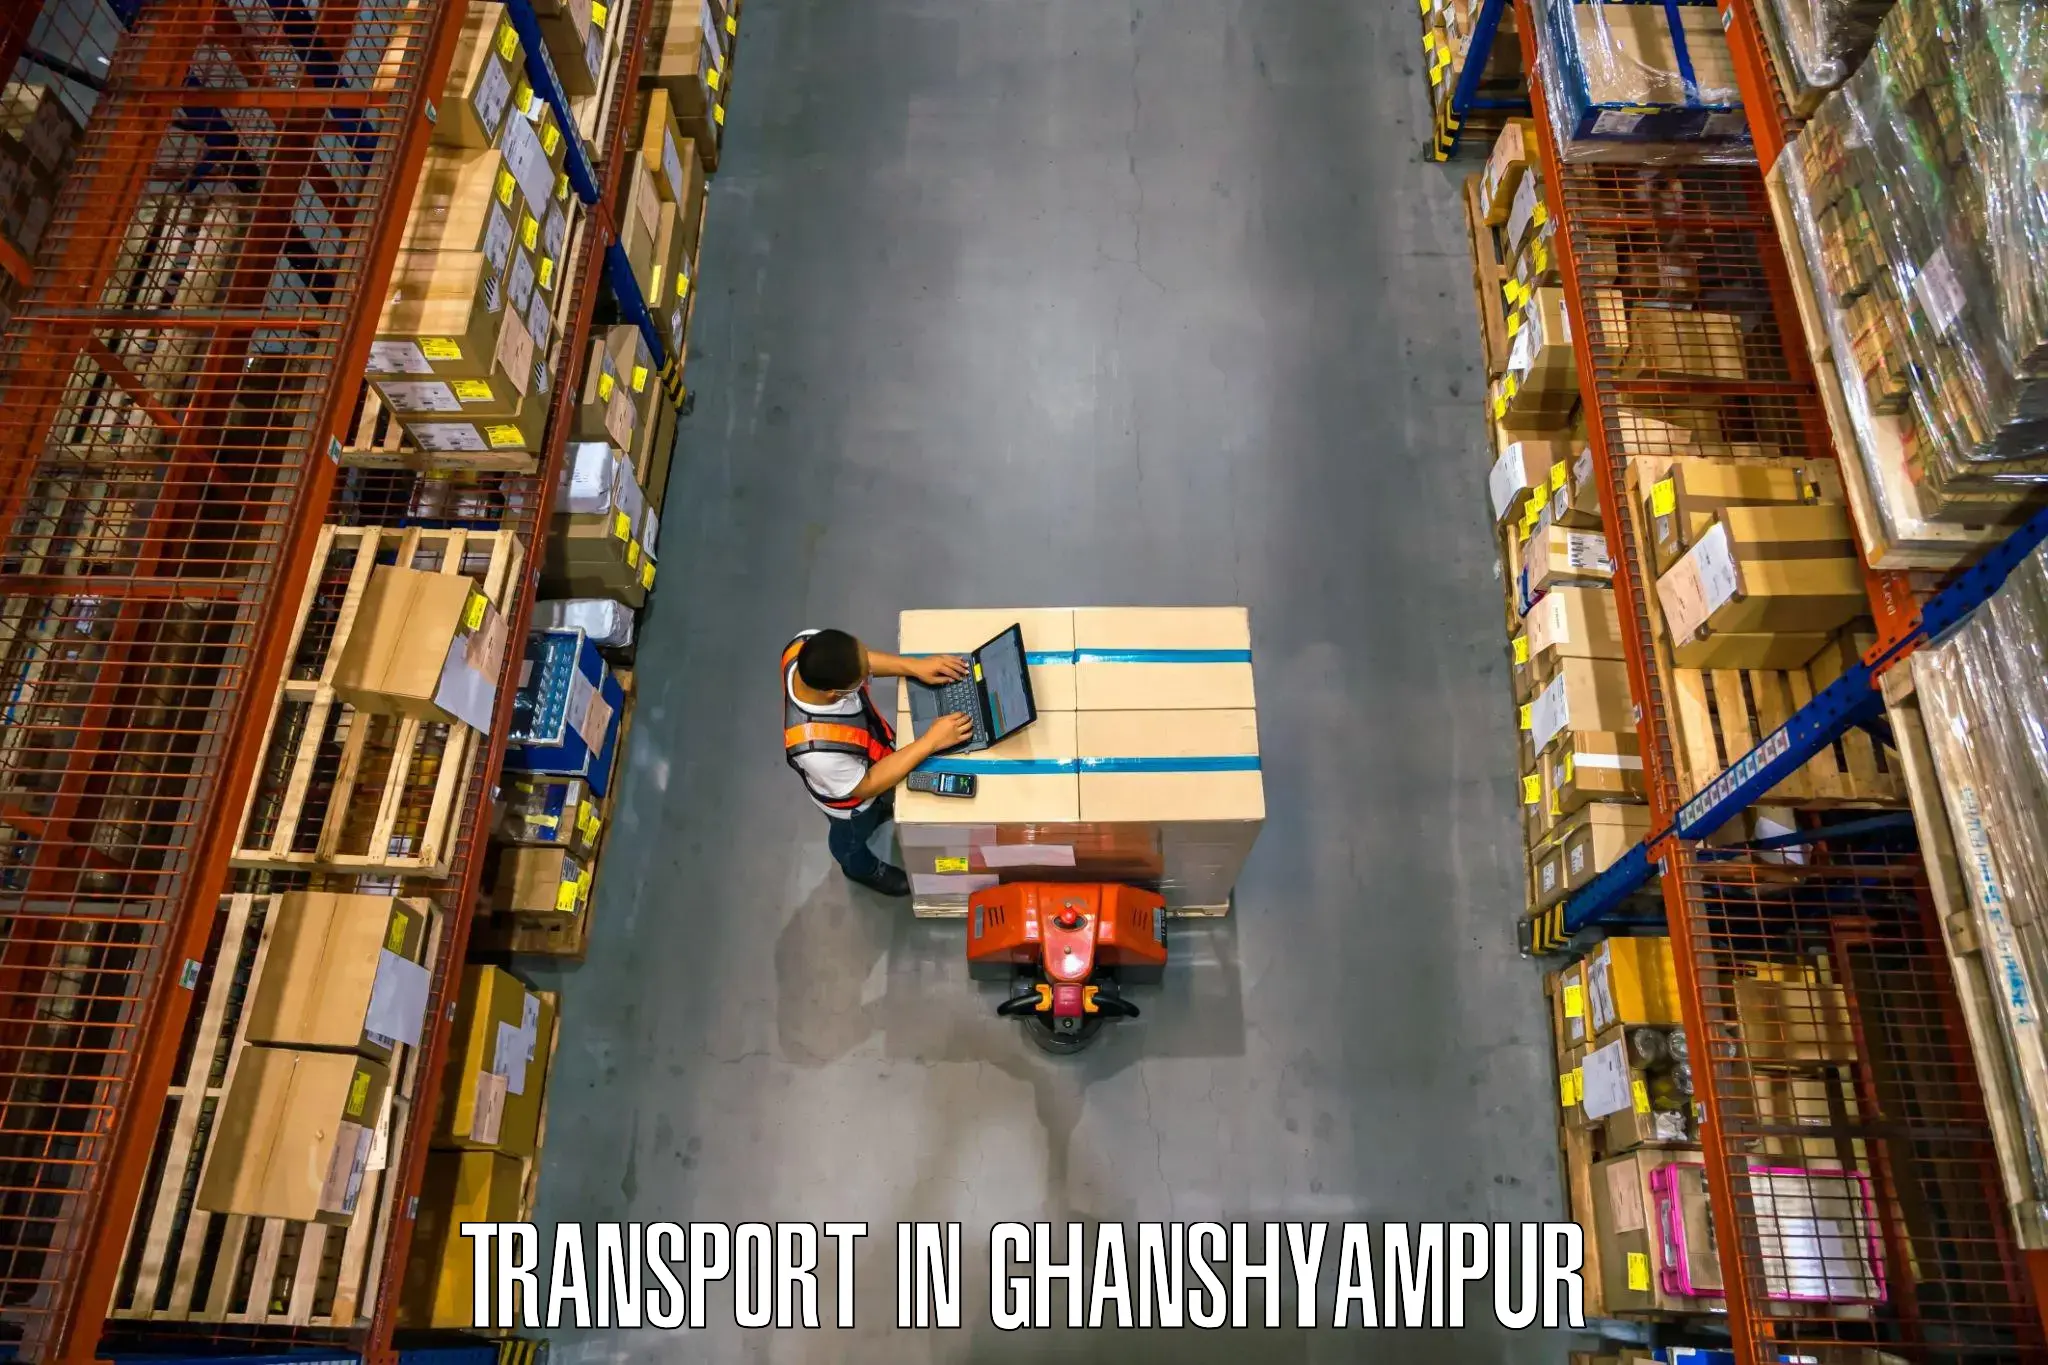 Transport shared services in Ghanshyampur